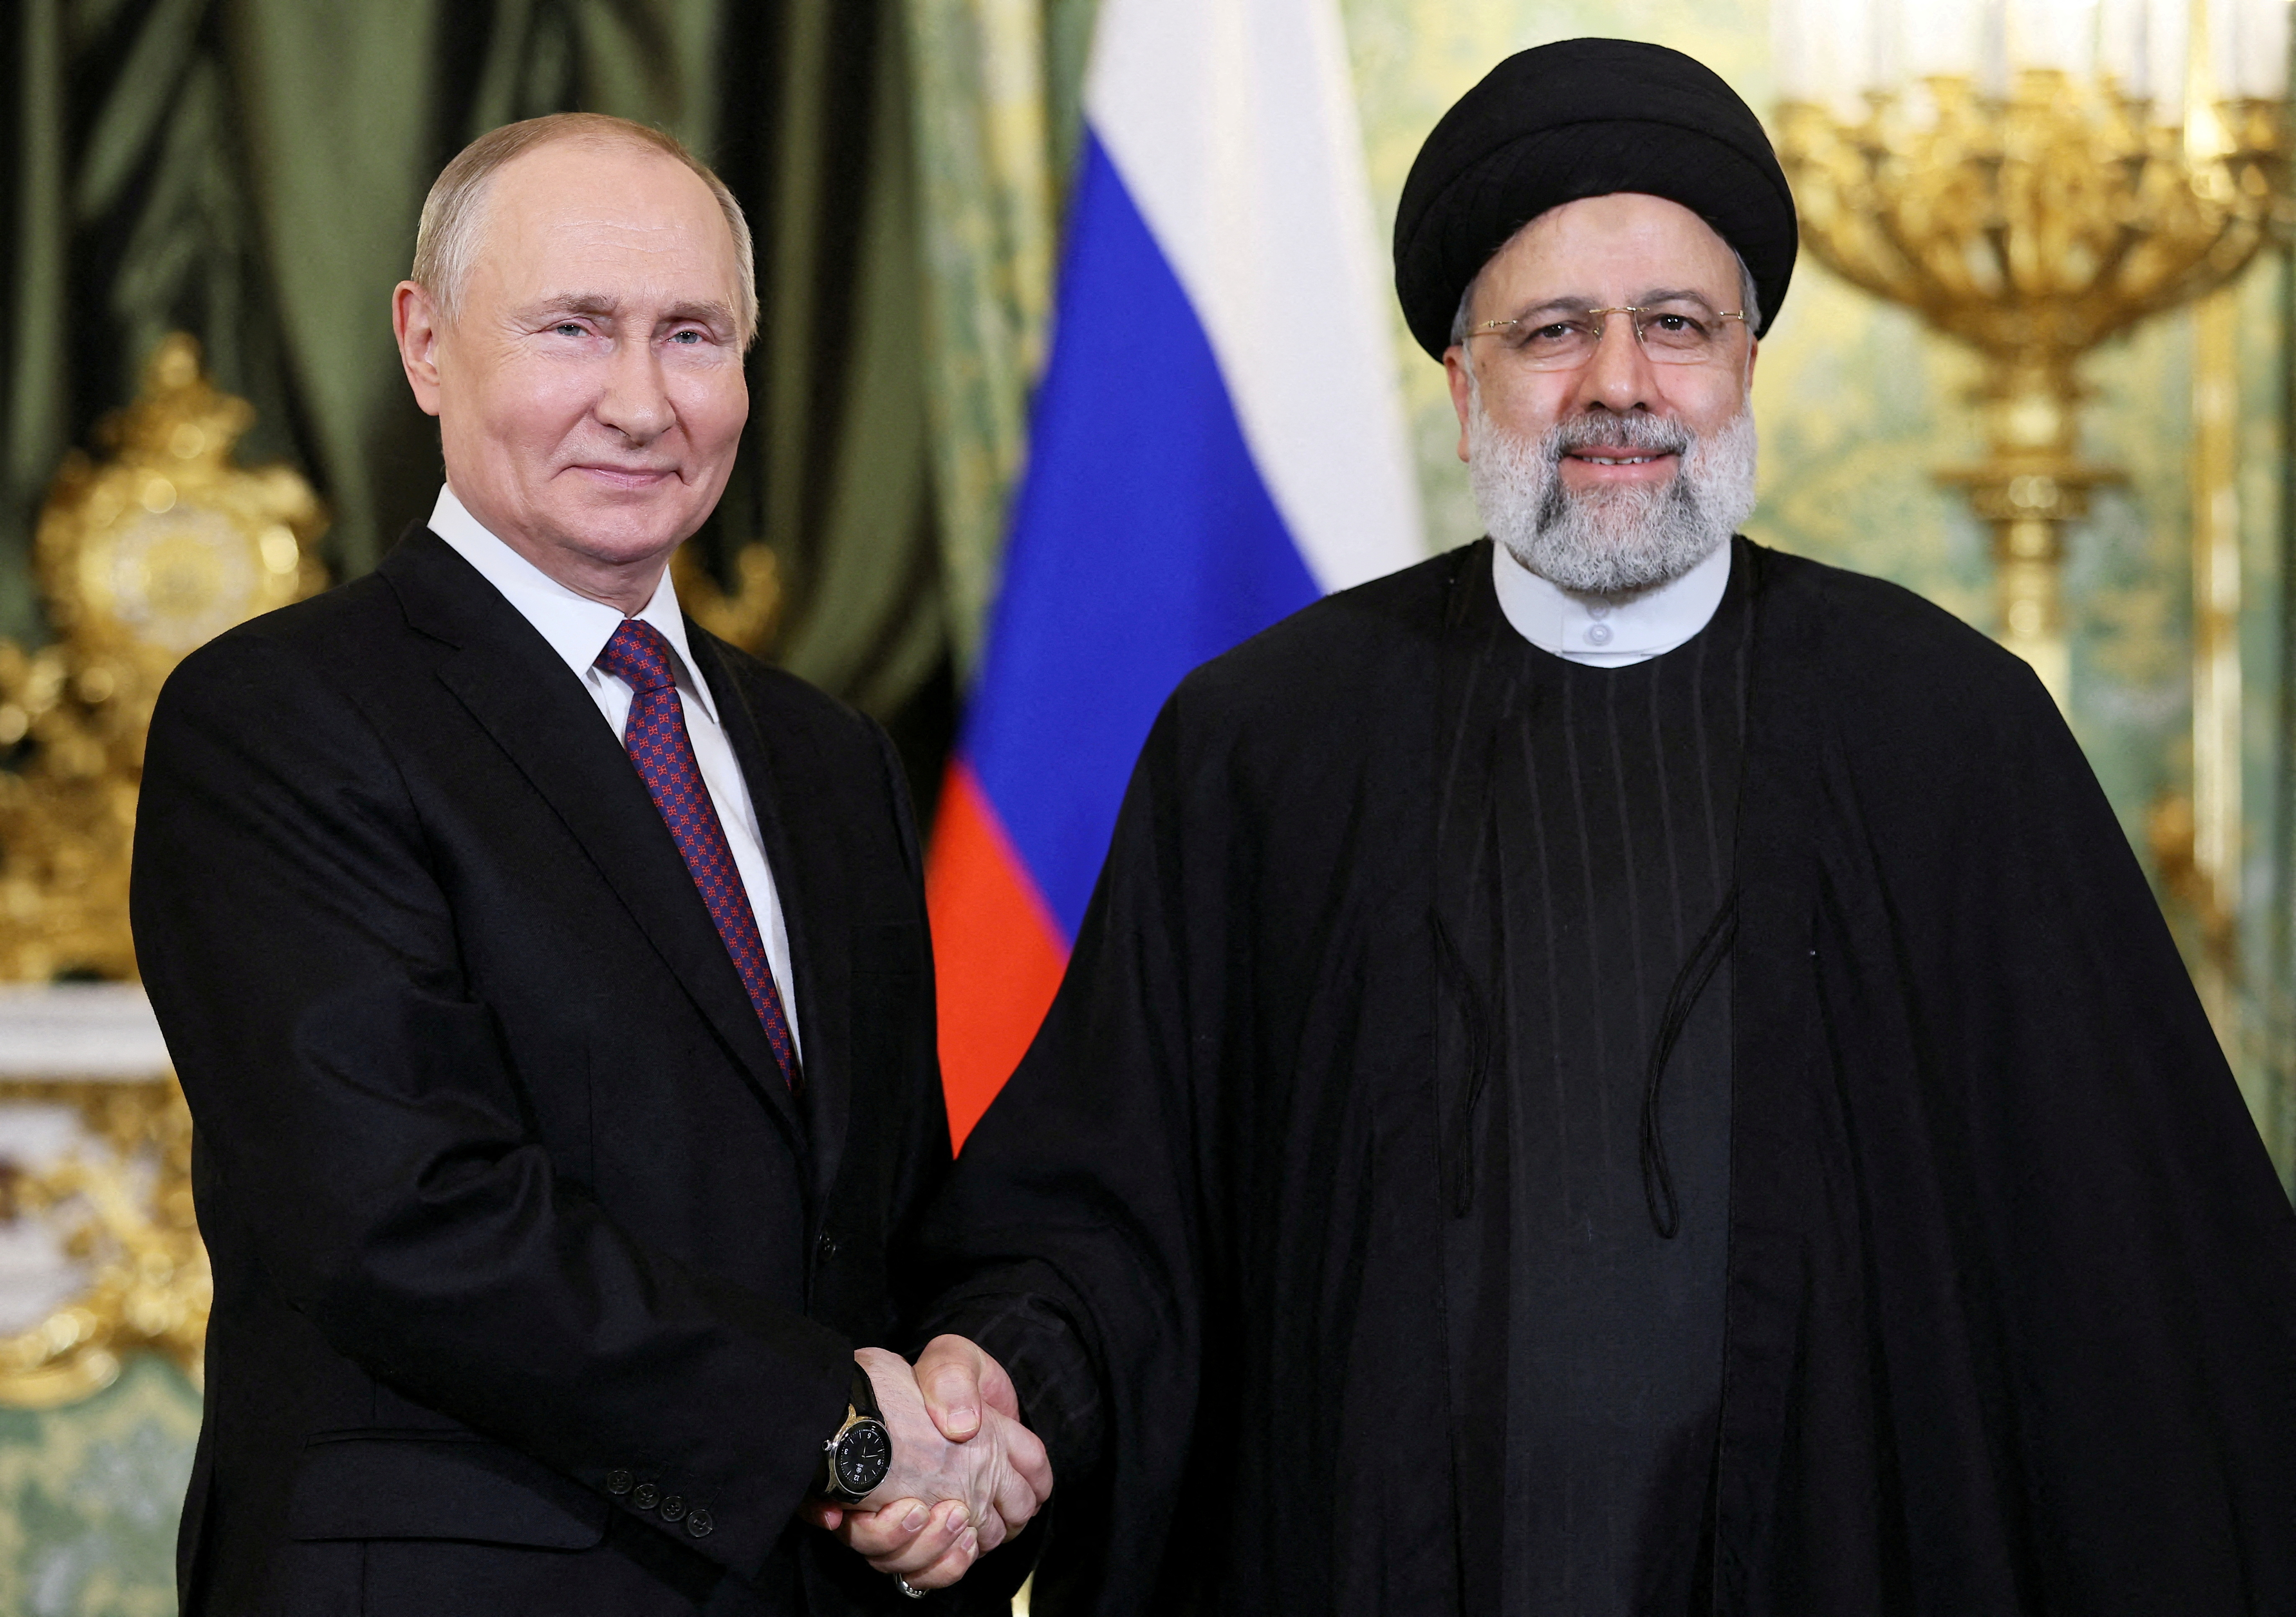 cover Russia&#8217;s new co-operation pact with Iran suspended, reasons given vague